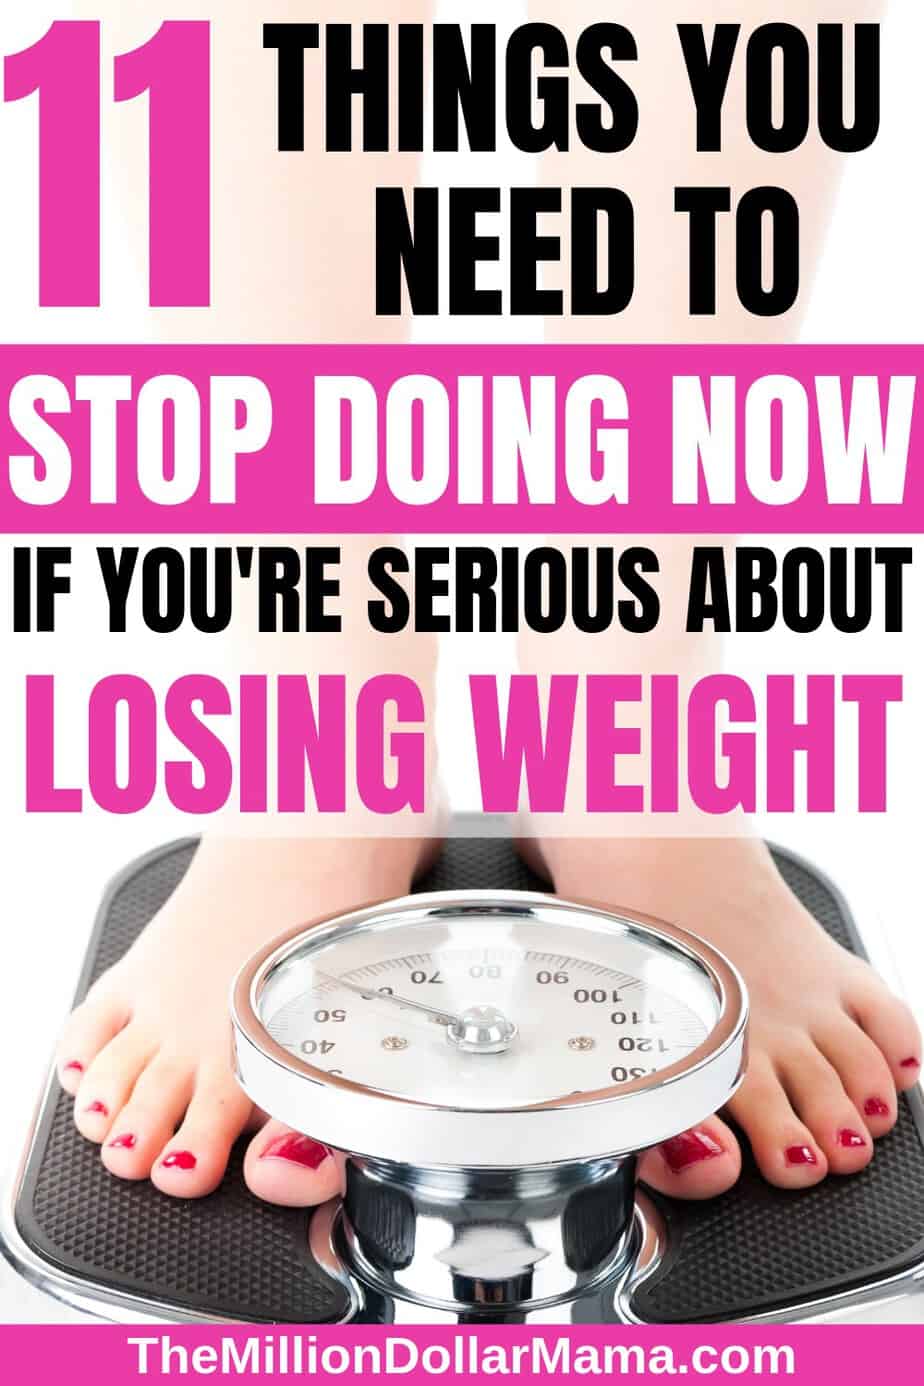 Weight loss tips are a dime a dozen, but most of them talk about what you SHOULD do. What about the things that you should NOT be doing if you want to lose weight? Click through to read 11 weight loss don'ts. #weightlosstips #weightlossmotivation #howtoloseweight